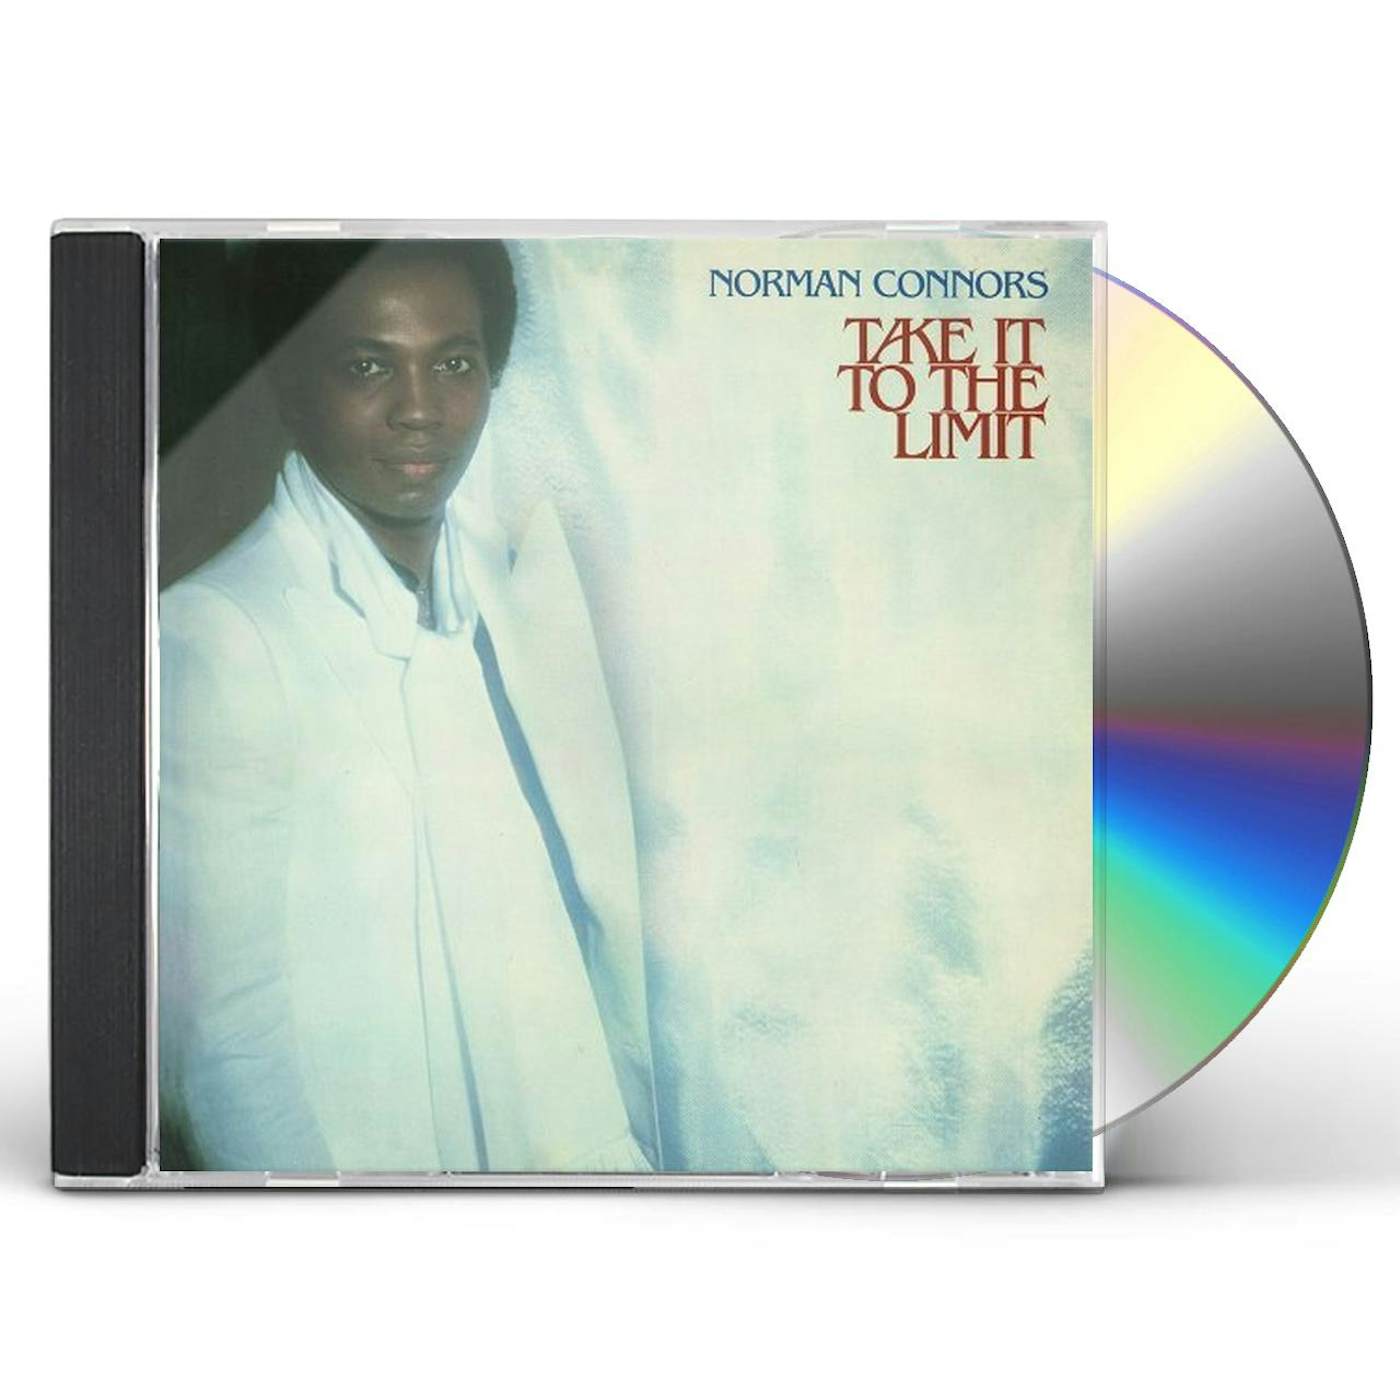 Norman Connors TAKE IT TO THE LIMIT CD